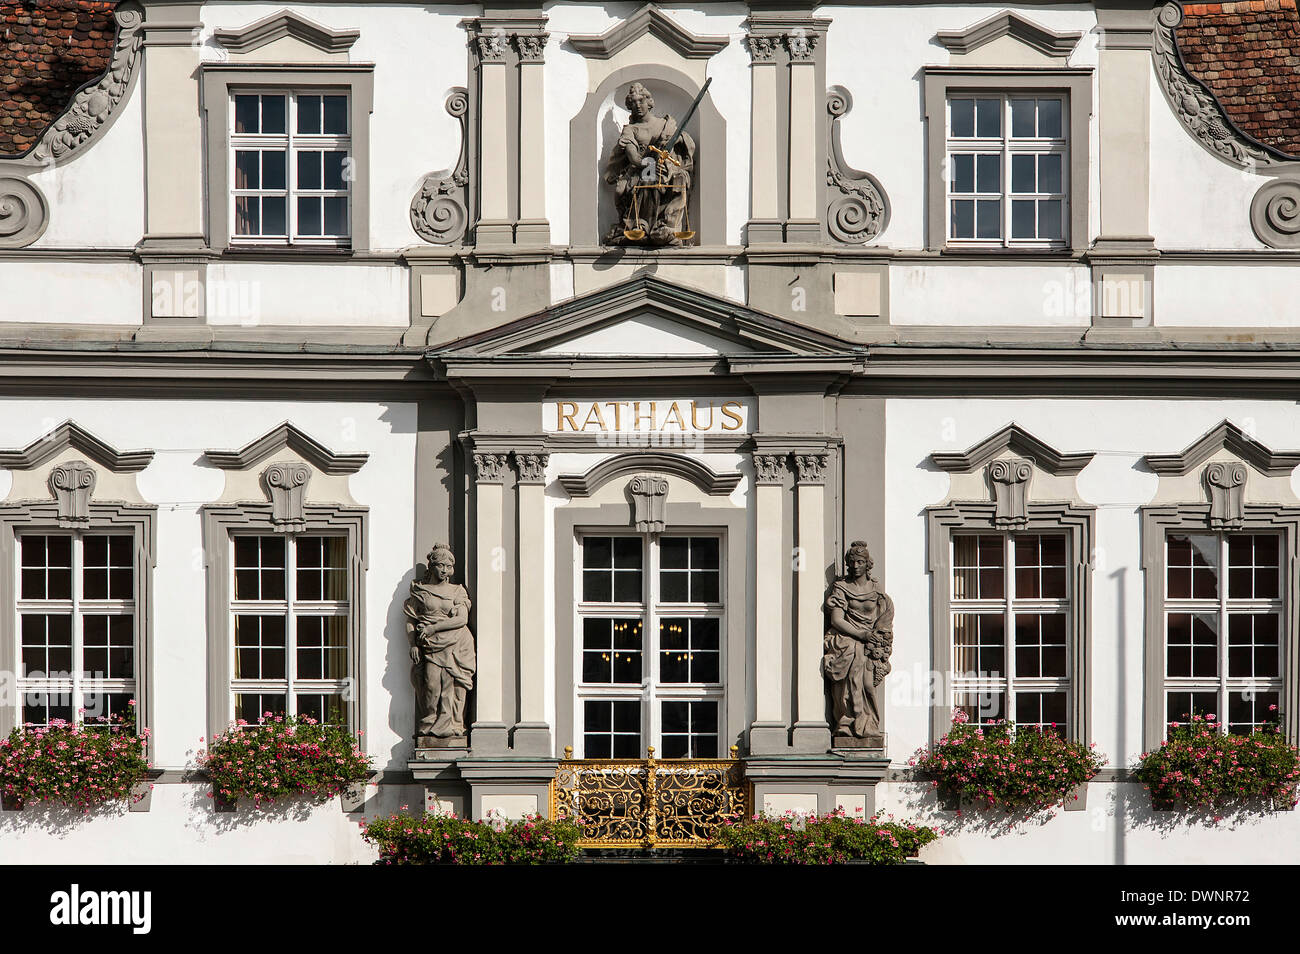 The baroque façade of the Town Hall, 1721, sculpture of Lady Justice at the top, Wangen, Allgäu, Bavaria, Germany. Stock Photo